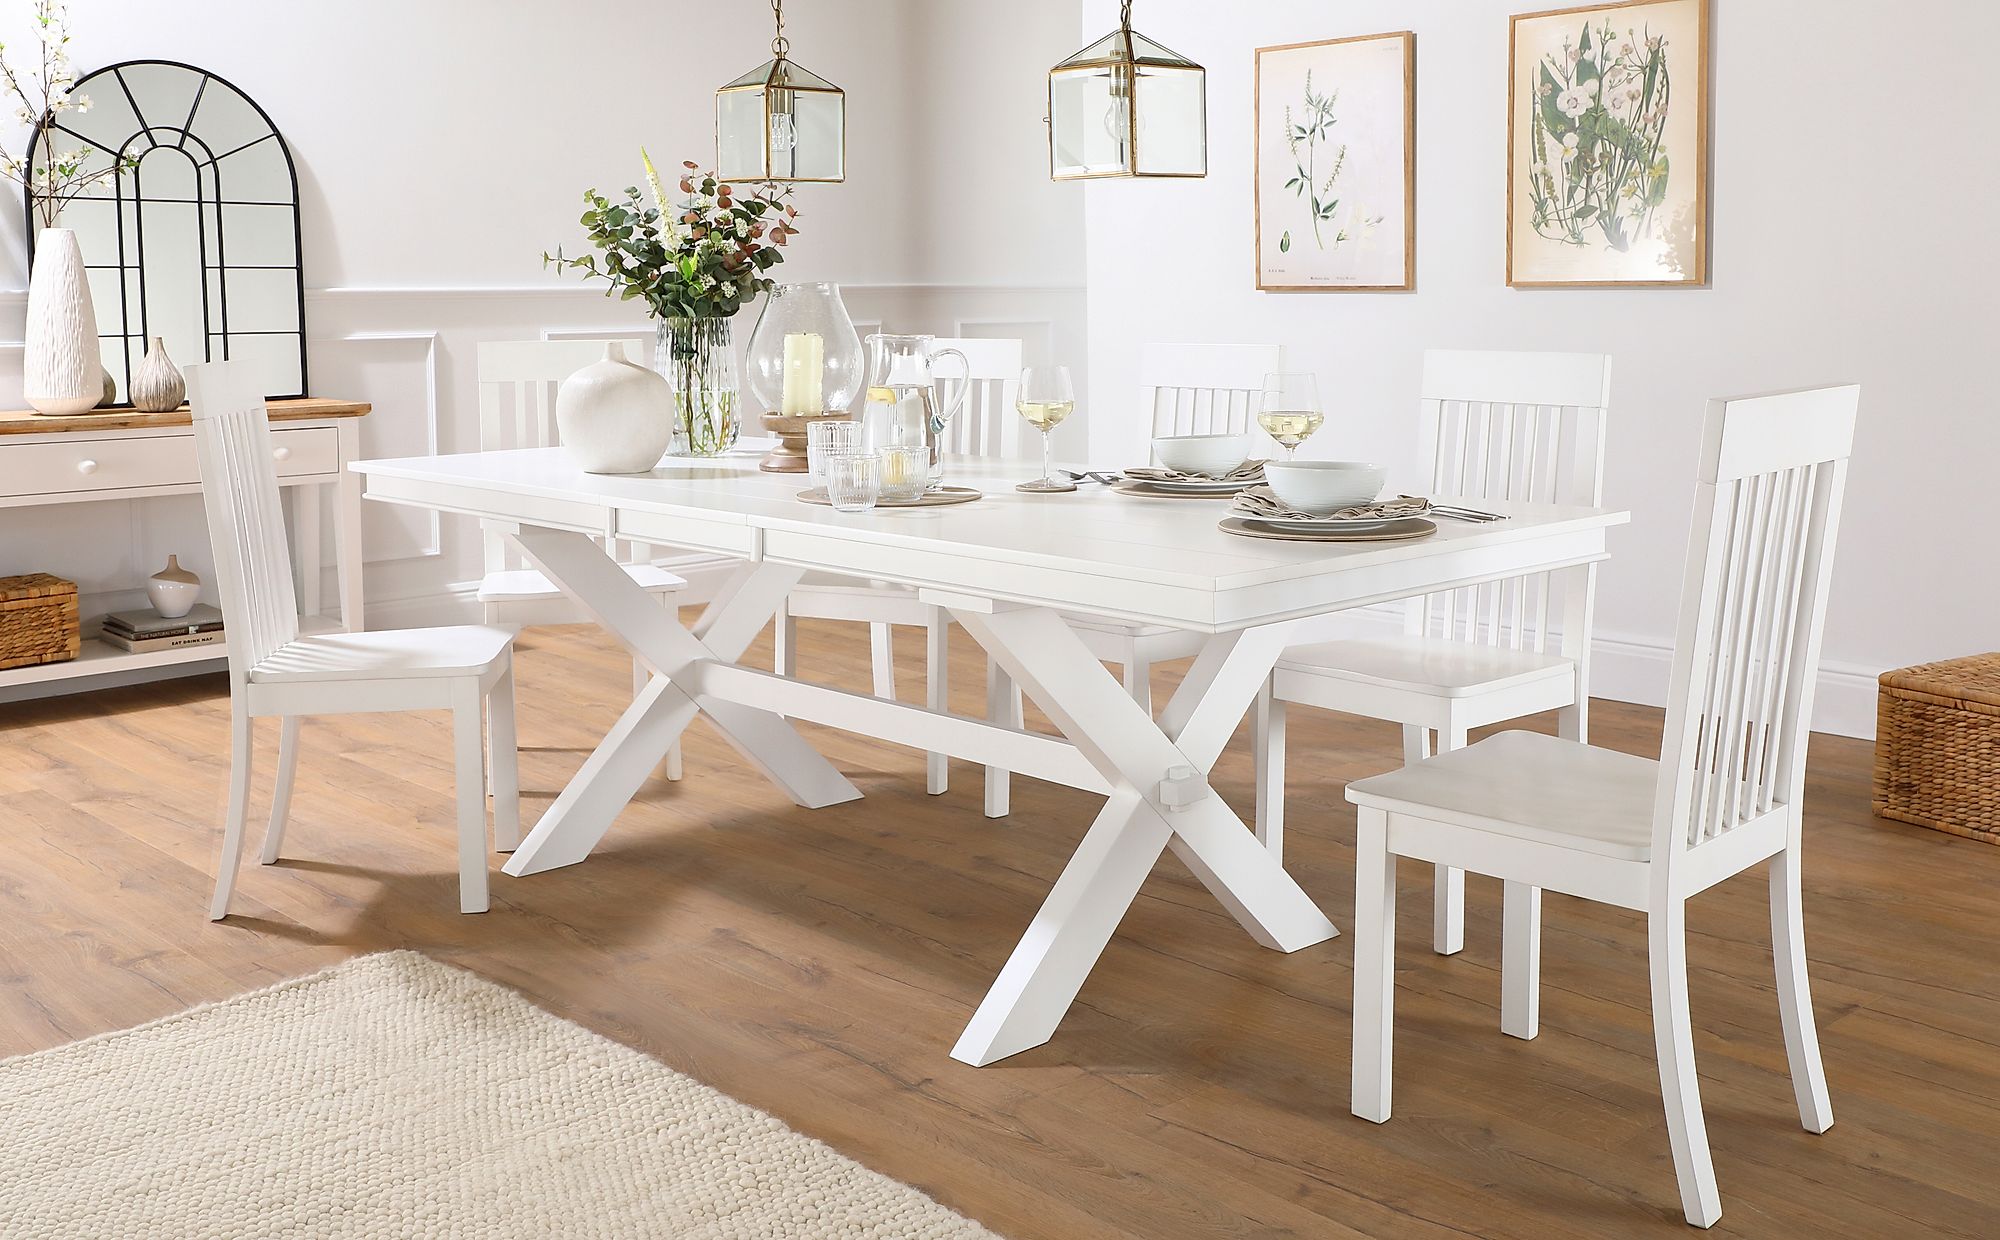 bright white kitchen table and chair